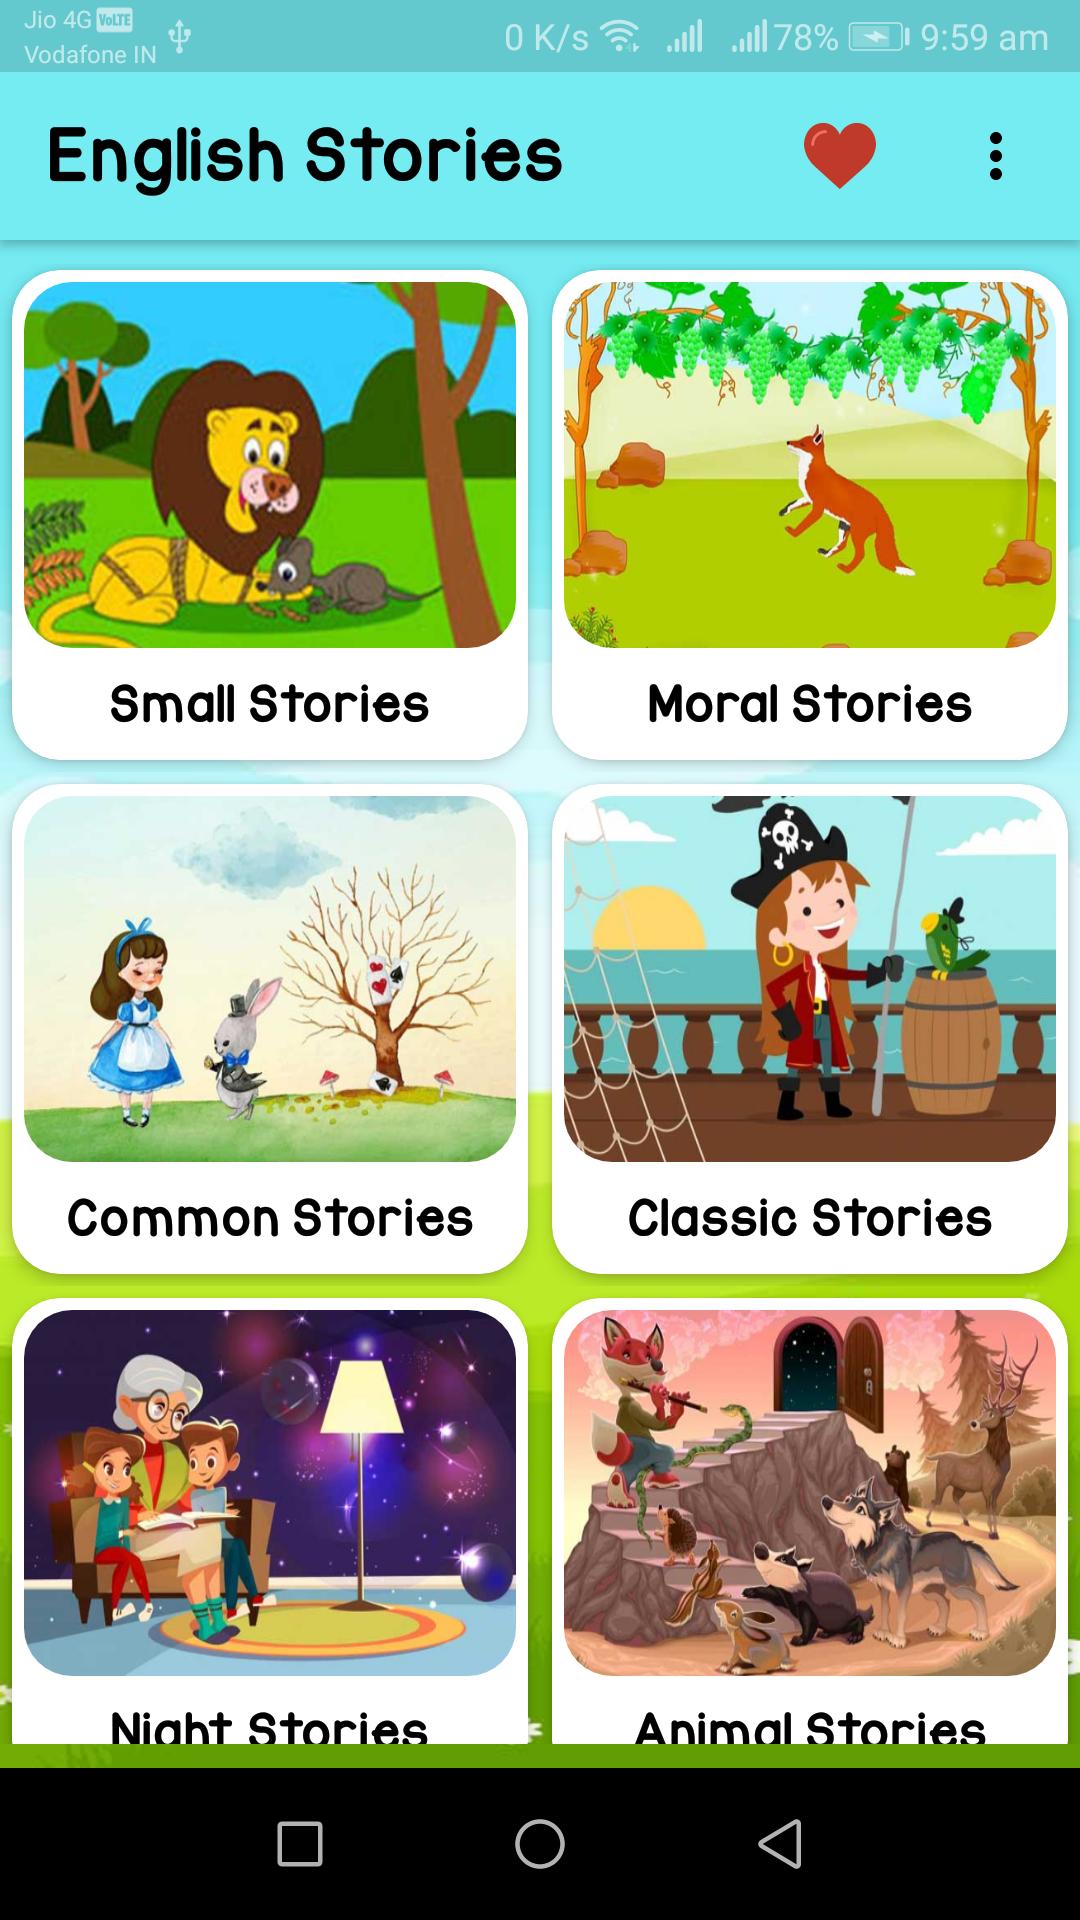 English stories. Little story или small story. Small story in English mp3. My best stories